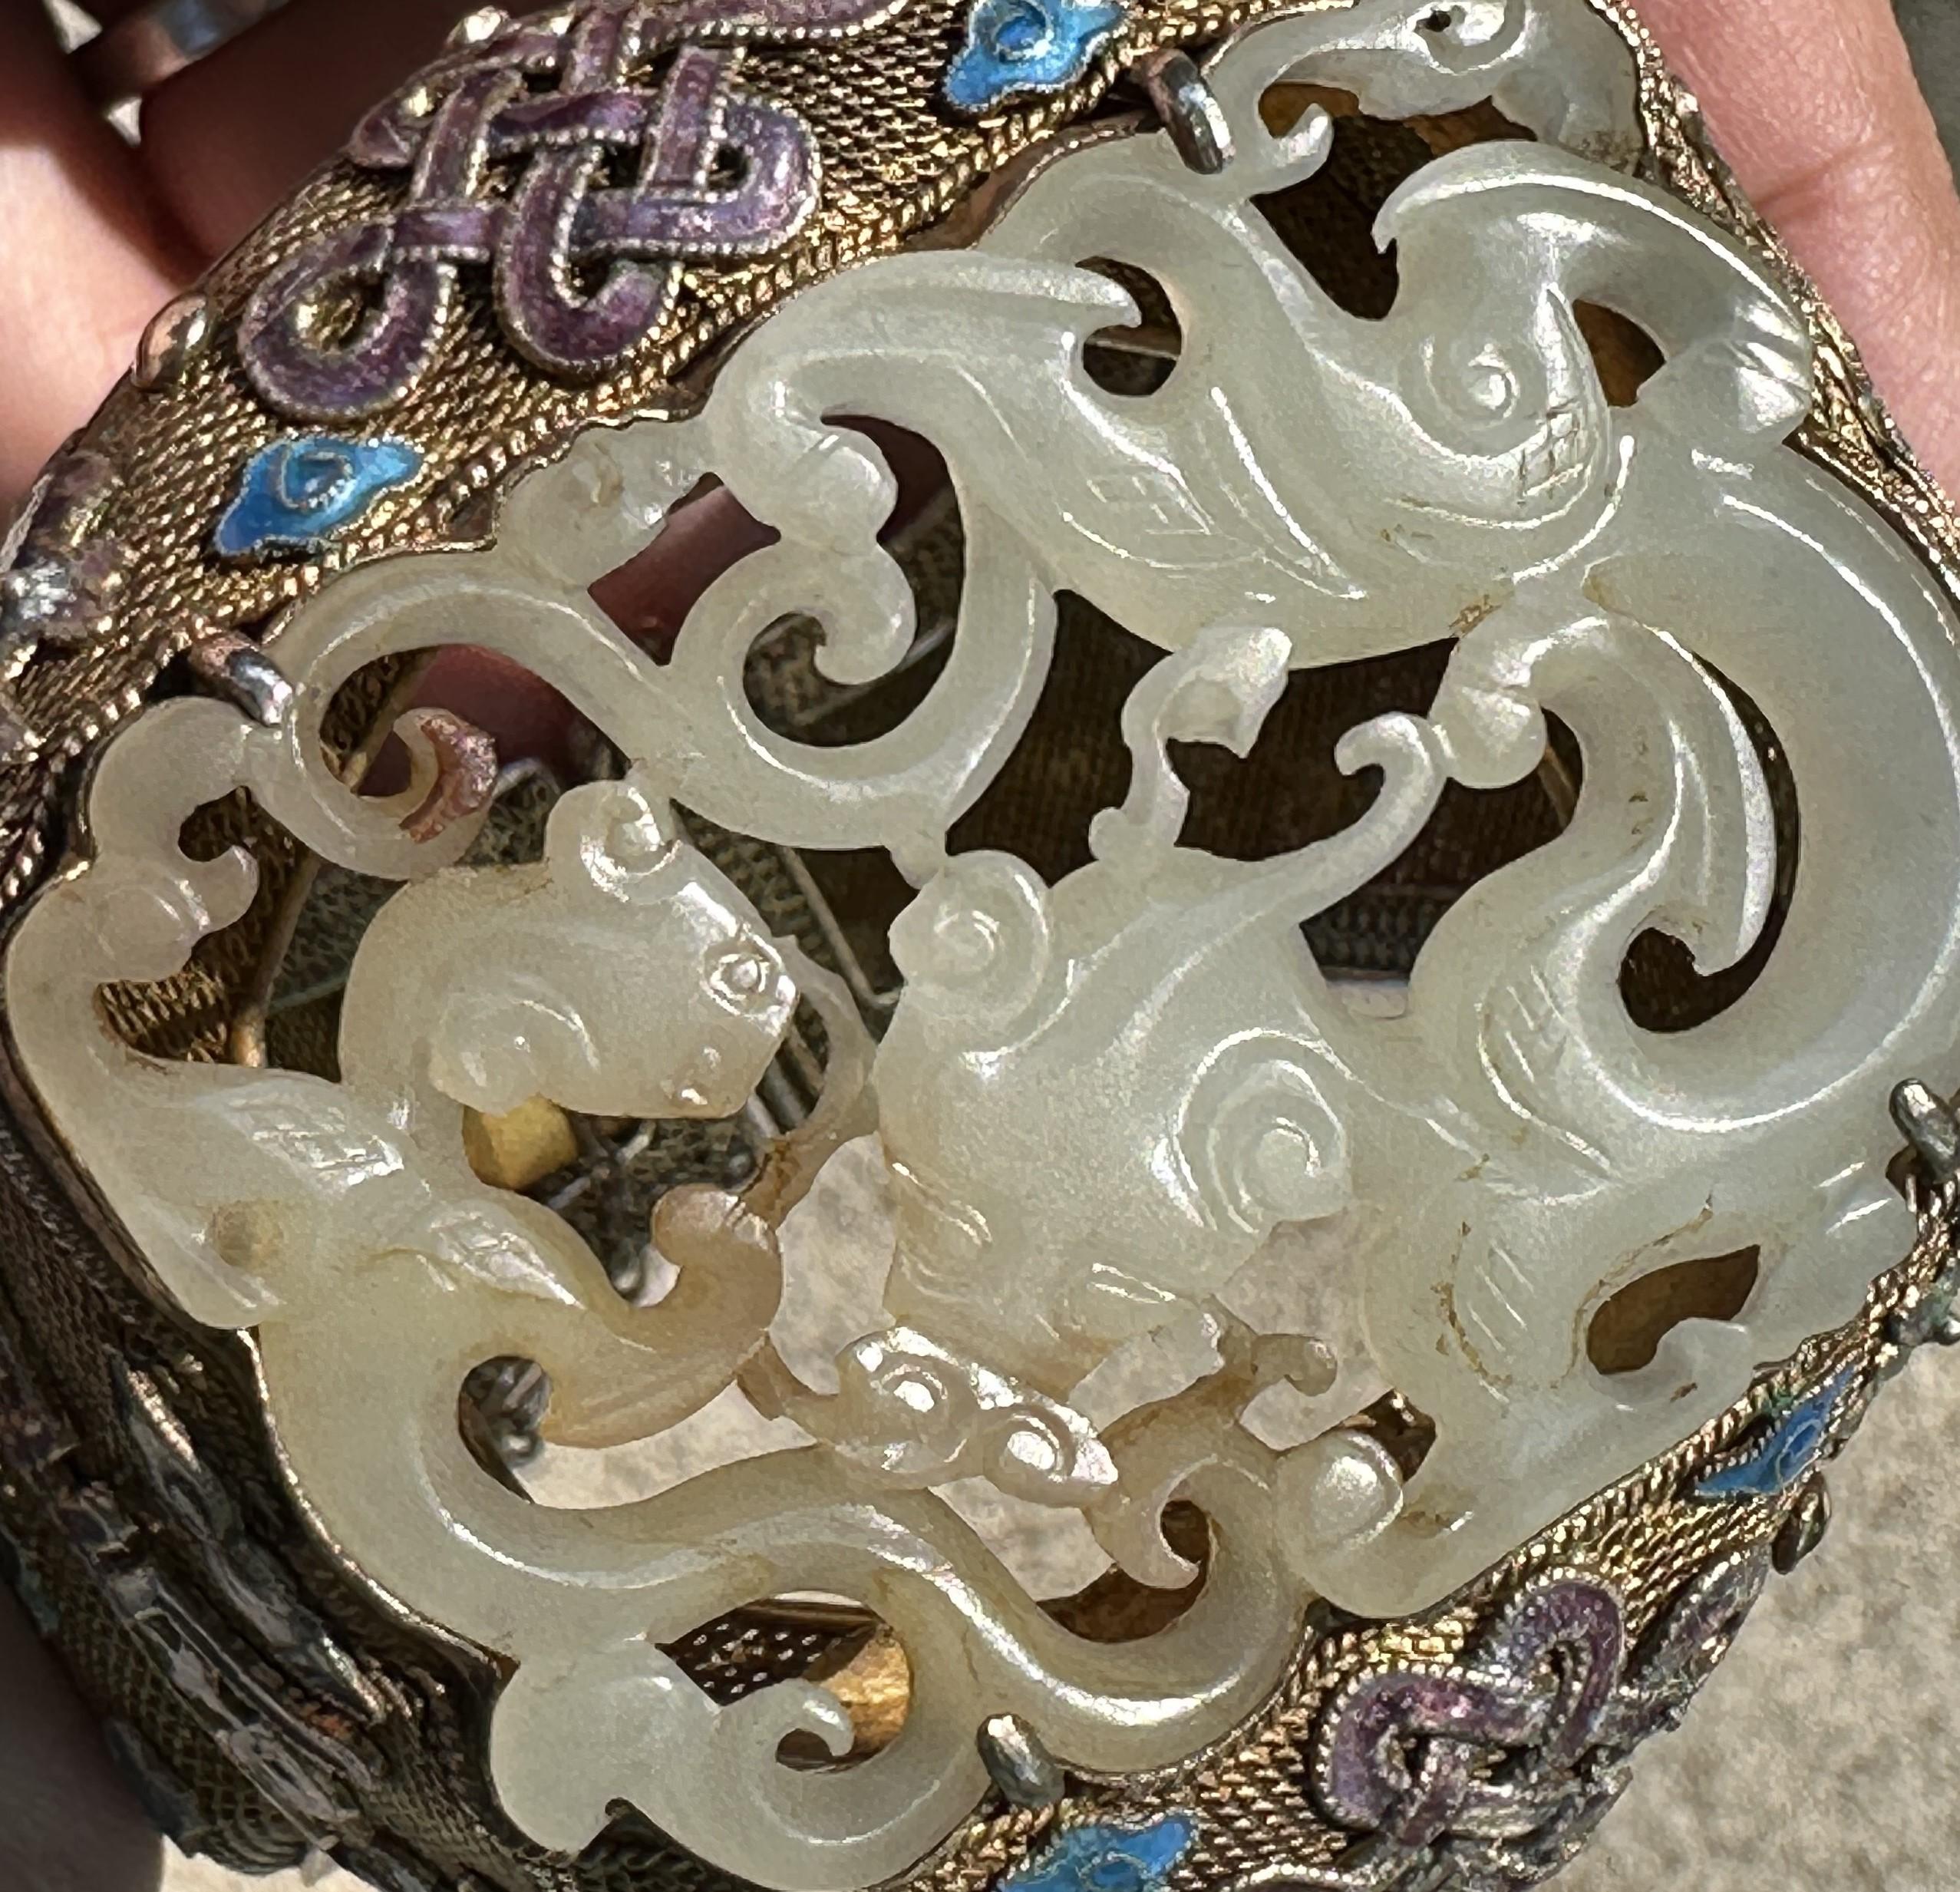 Chinese Export Silver Vermeil and Enamel Carved Jade Medallion Hinged Cuff Bracelet